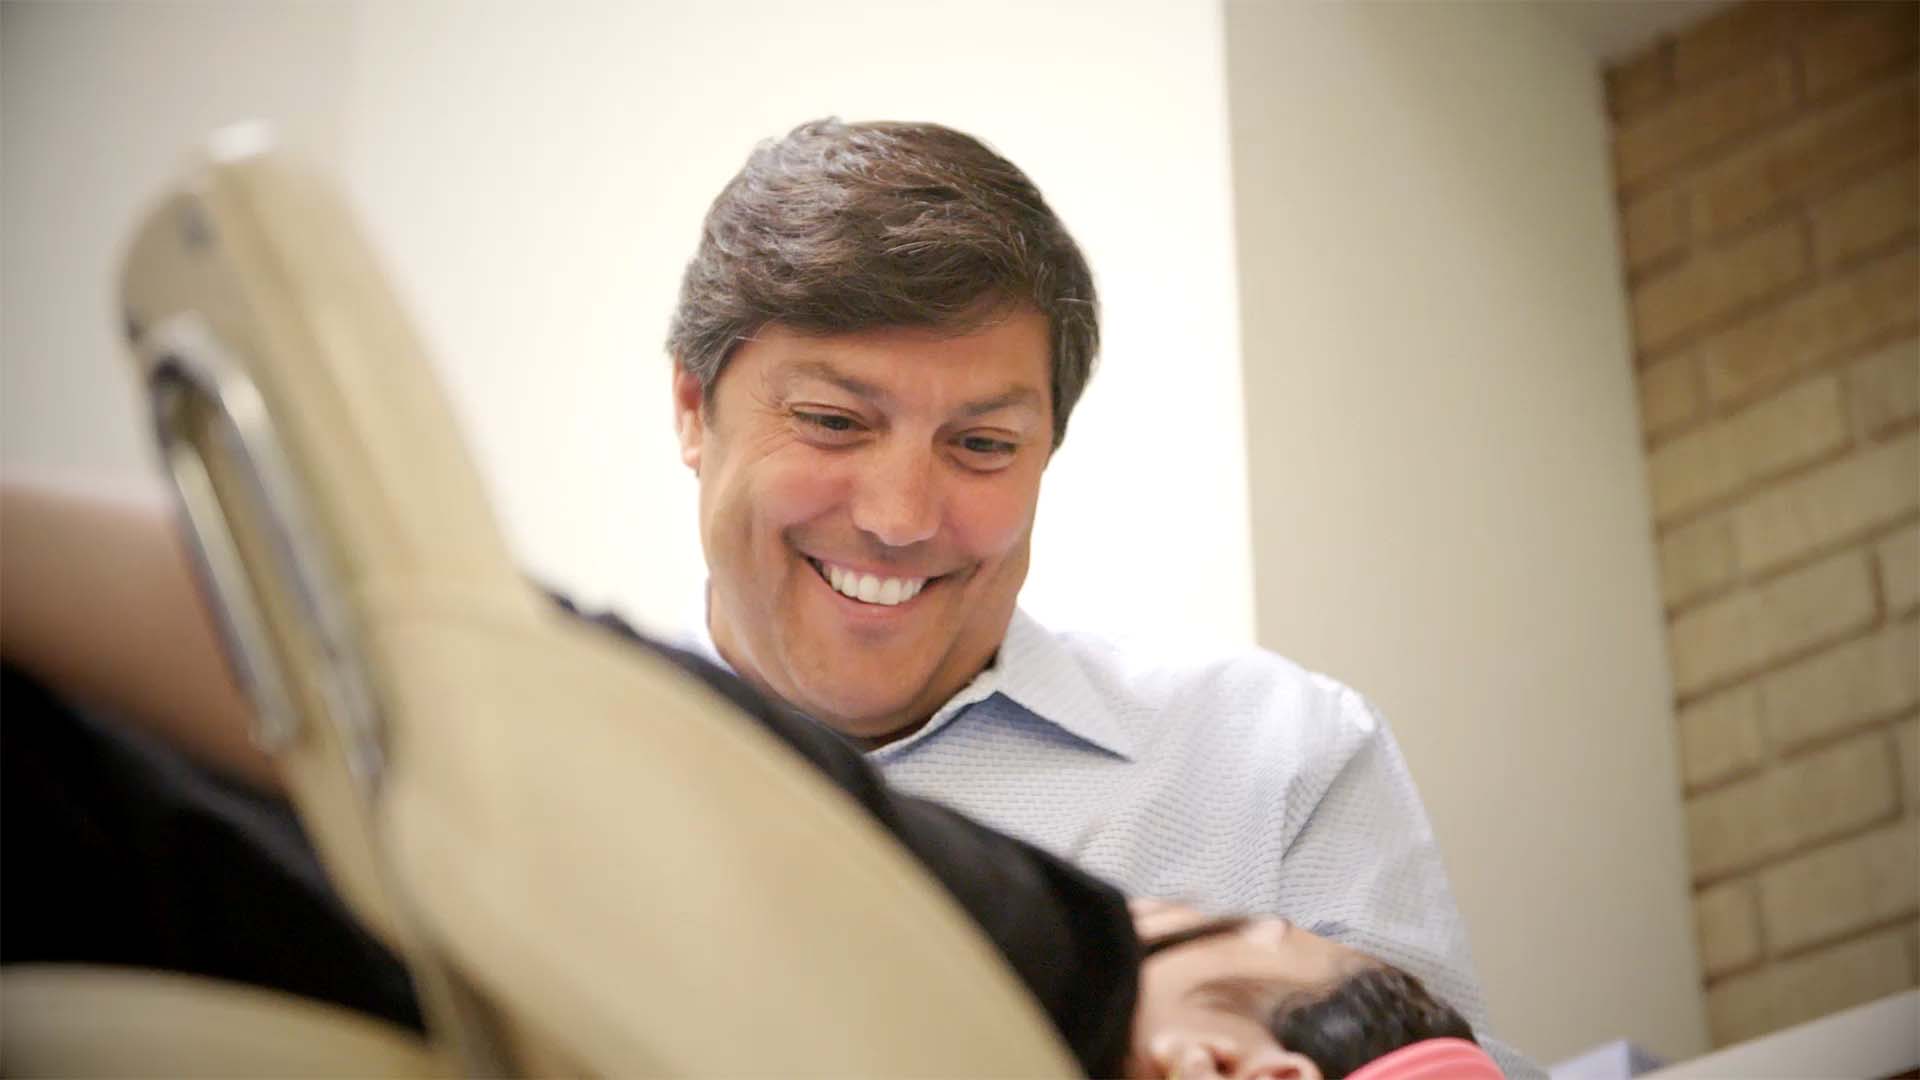 Dr Stefen Lippitz smiles while examining a patient from Winnetka